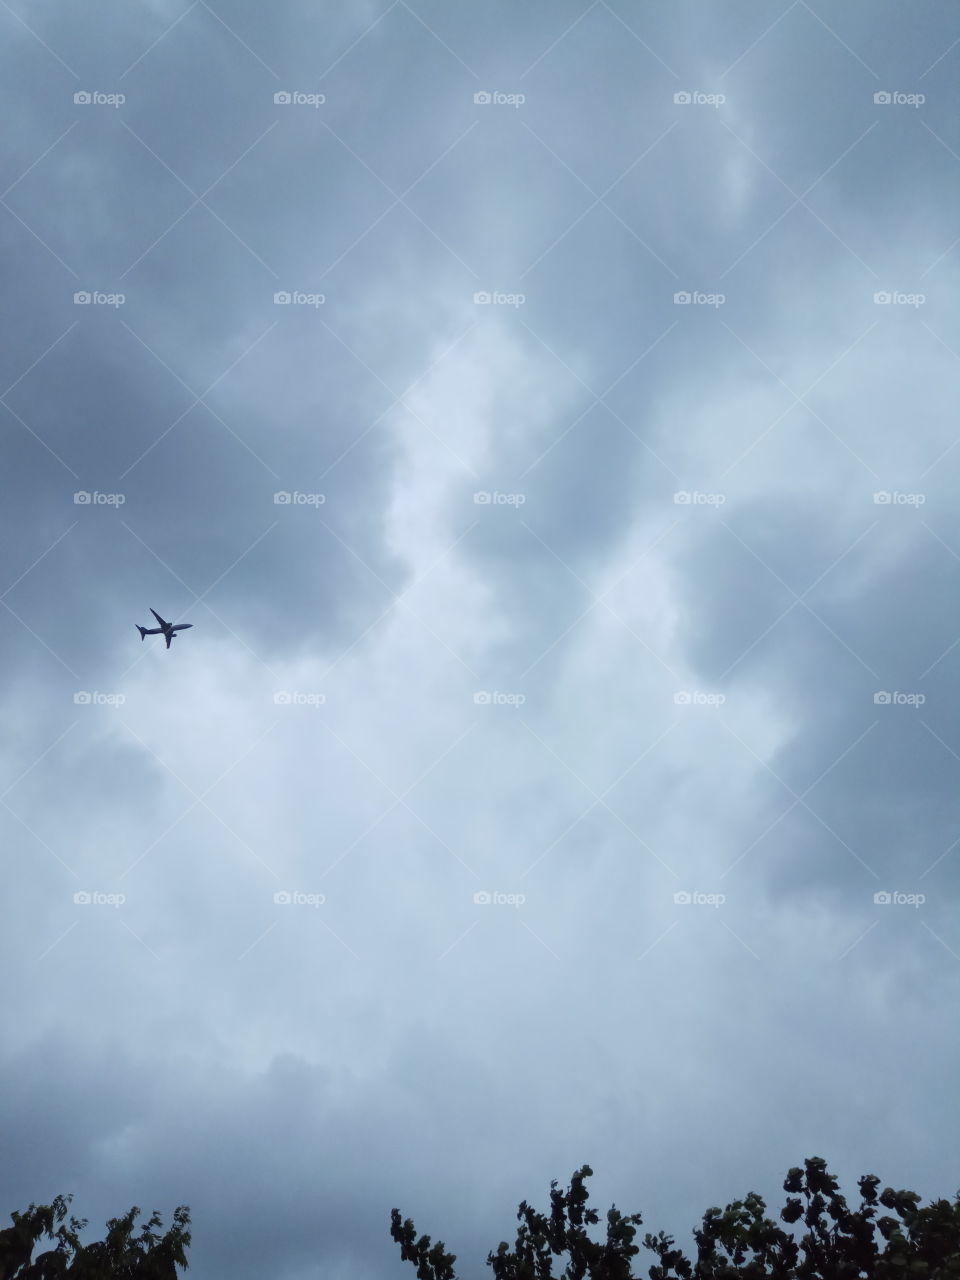 airplane under the cloudy sky